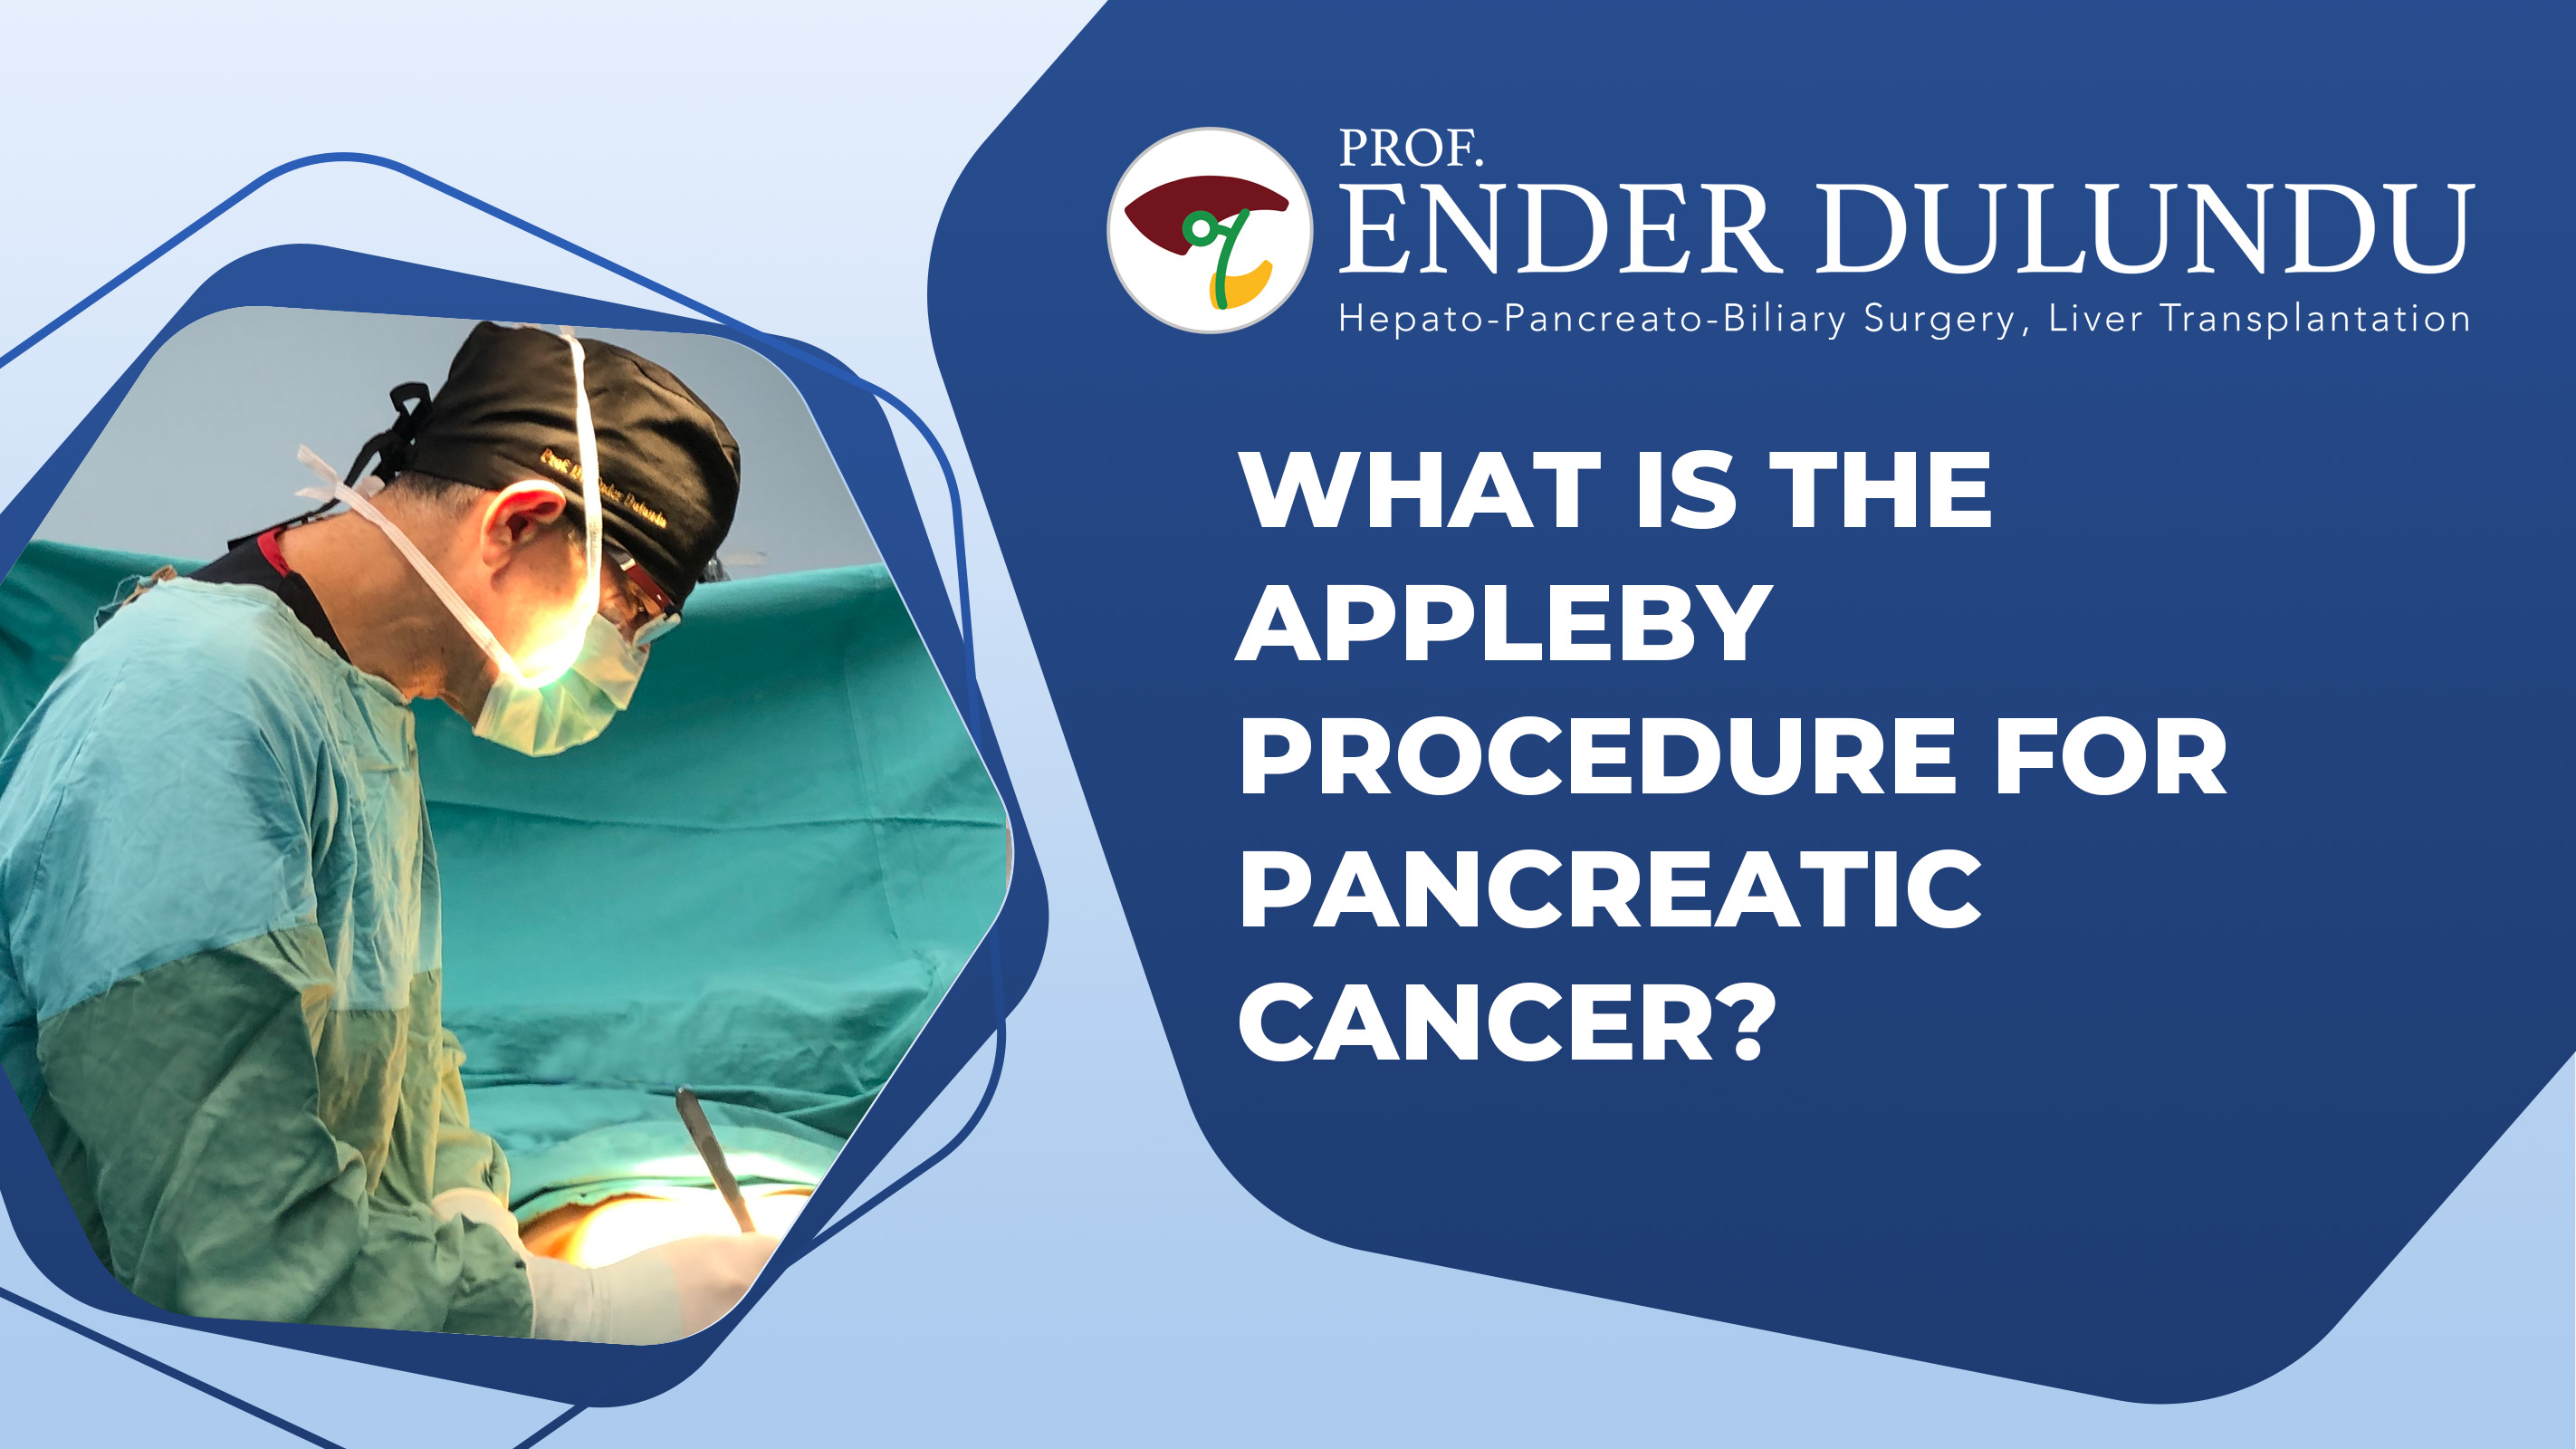 What Is The Appleby Procedure For Pancreatic Cancer?